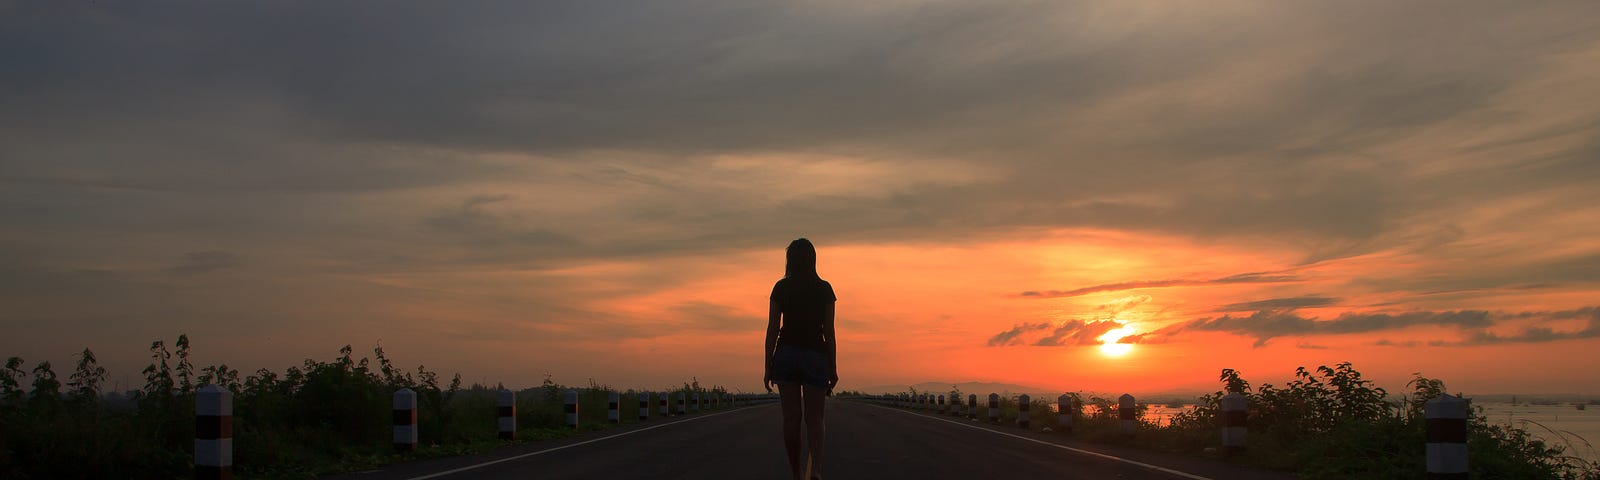 Girl walking alone at night on a deserted highway.